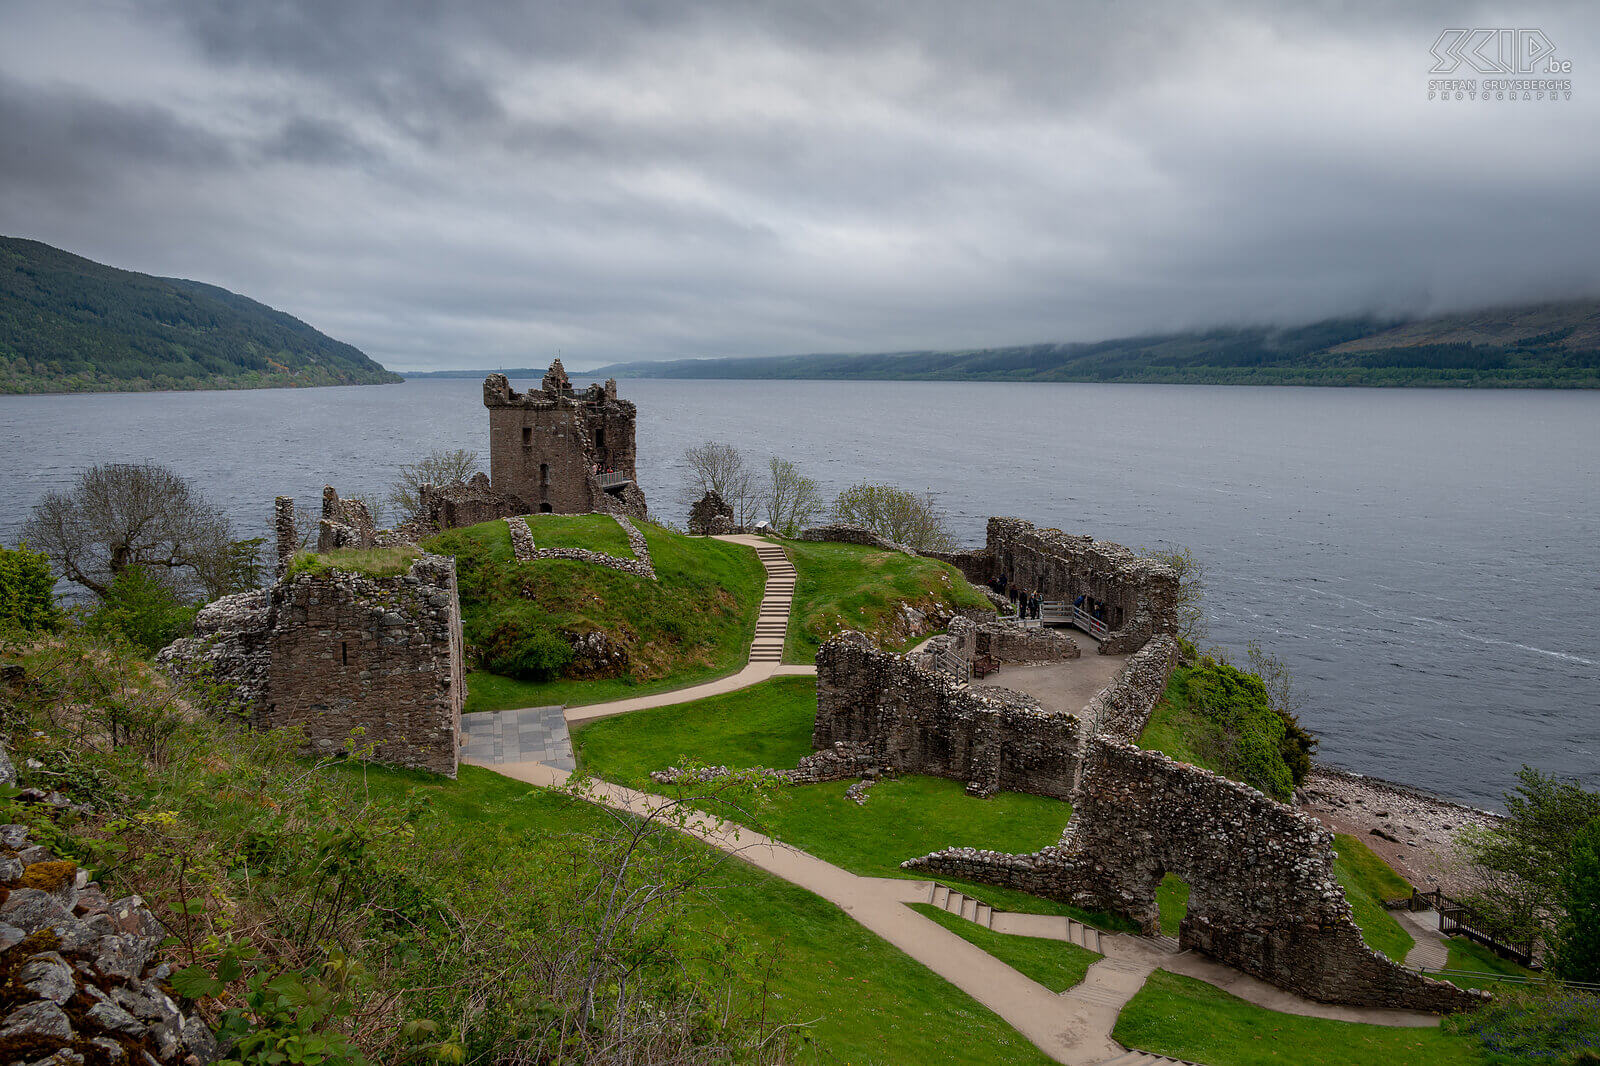 Loch Ness - Urquhart Castle On the western shore of Scotland's most famous lake Loch Ness lies one of Scotland's largest castles, Urquhart Castle. This once impressive castle was built in 1308 and saw many conflicts. Control of the castle passed back and forth between the Scots and the English during the Wars of Independence. Nowadays you can visit the iconic ruin from the Middle Ages. Stefan Cruysberghs